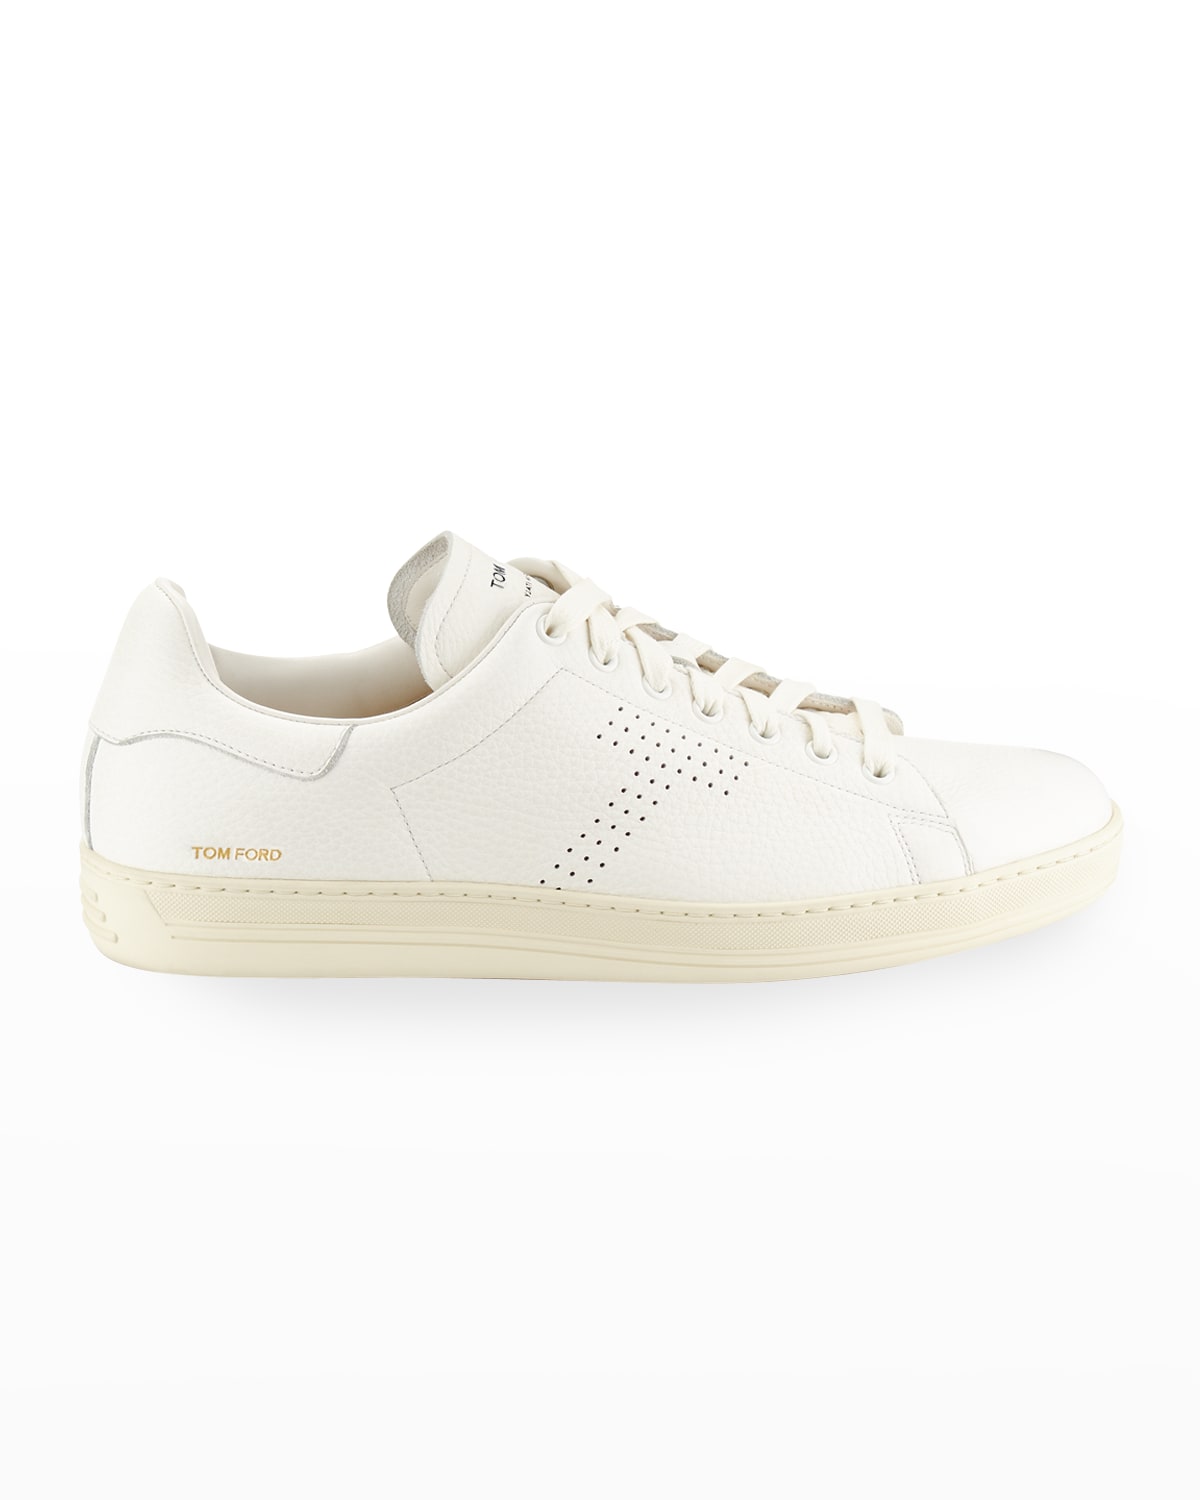 Tom Ford Low Top Sneakers | Neiman Marcus